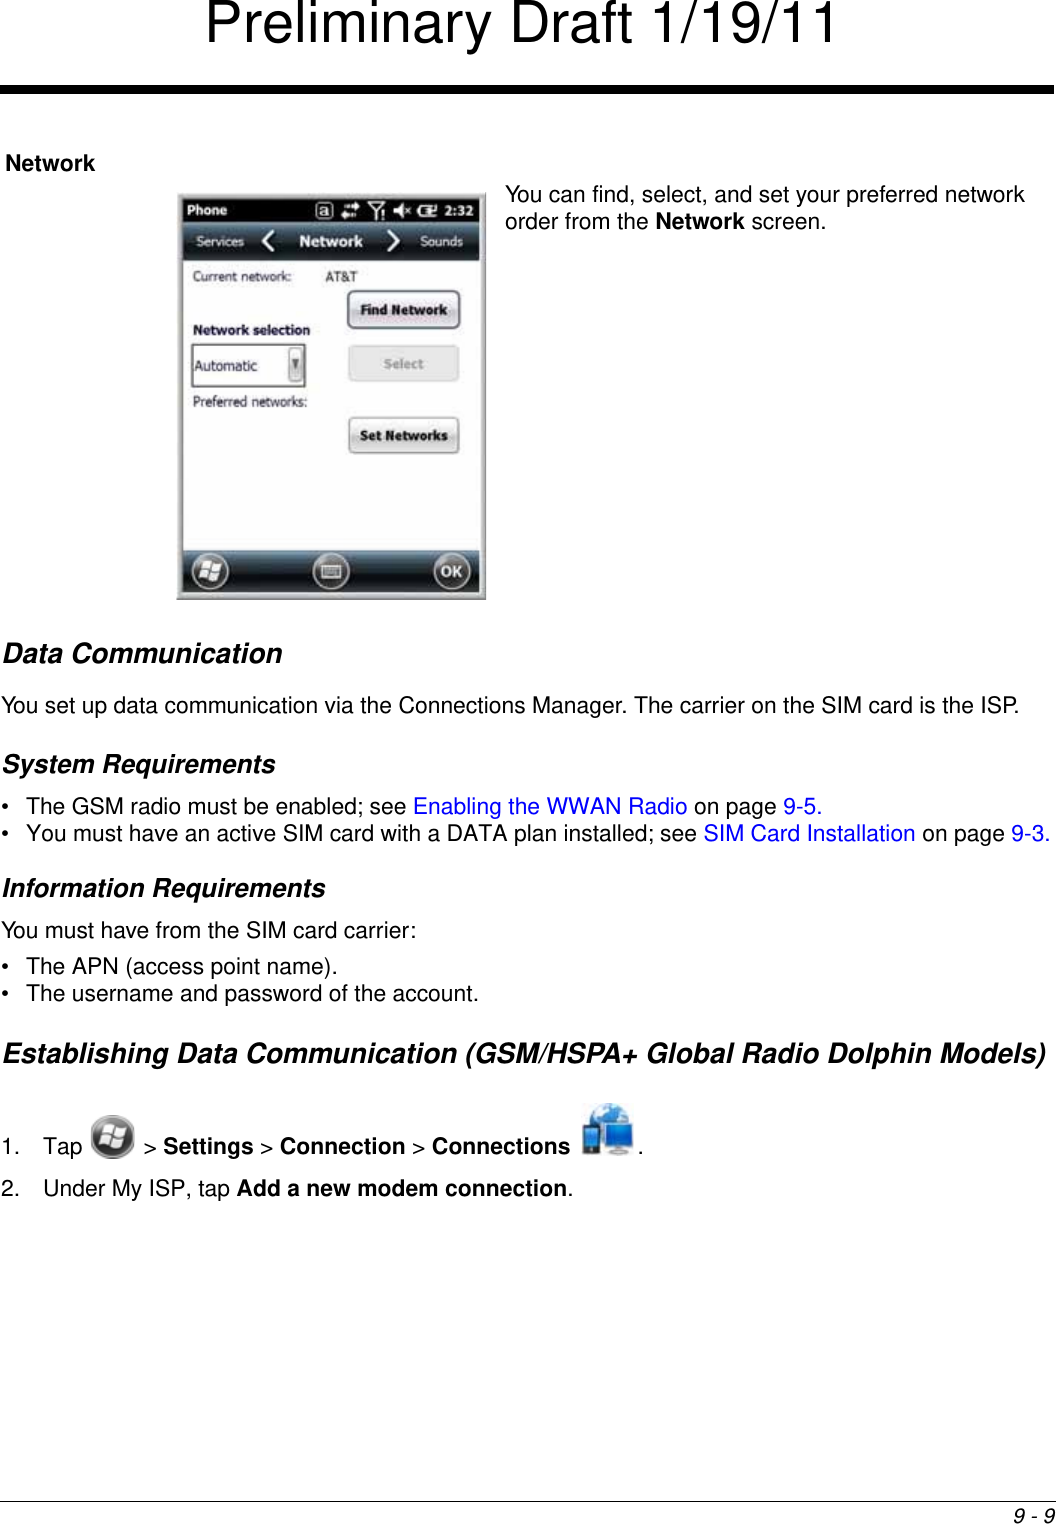 9 - 9Data CommunicationYou set up data communication via the Connections Manager. The carrier on the SIM card is the ISP.System Requirements• The GSM radio must be enabled; see Enabling the WWAN Radio on page 9-5.• You must have an active SIM card with a DATA plan installed; see SIM Card Installation on page 9-3.Information RequirementsYou must have from the SIM card carrier:• The APN (access point name).• The username and password of the account.Establishing Data Communication (GSM/HSPA+ Global Radio Dolphin Models)1. Tap  &gt; Settings &gt; Connection &gt; Connections .2. Under My ISP, tap Add a new modem connection.NetworkYou can find, select, and set your preferred network order from the Network screen.Preliminary Draft 1/19/11